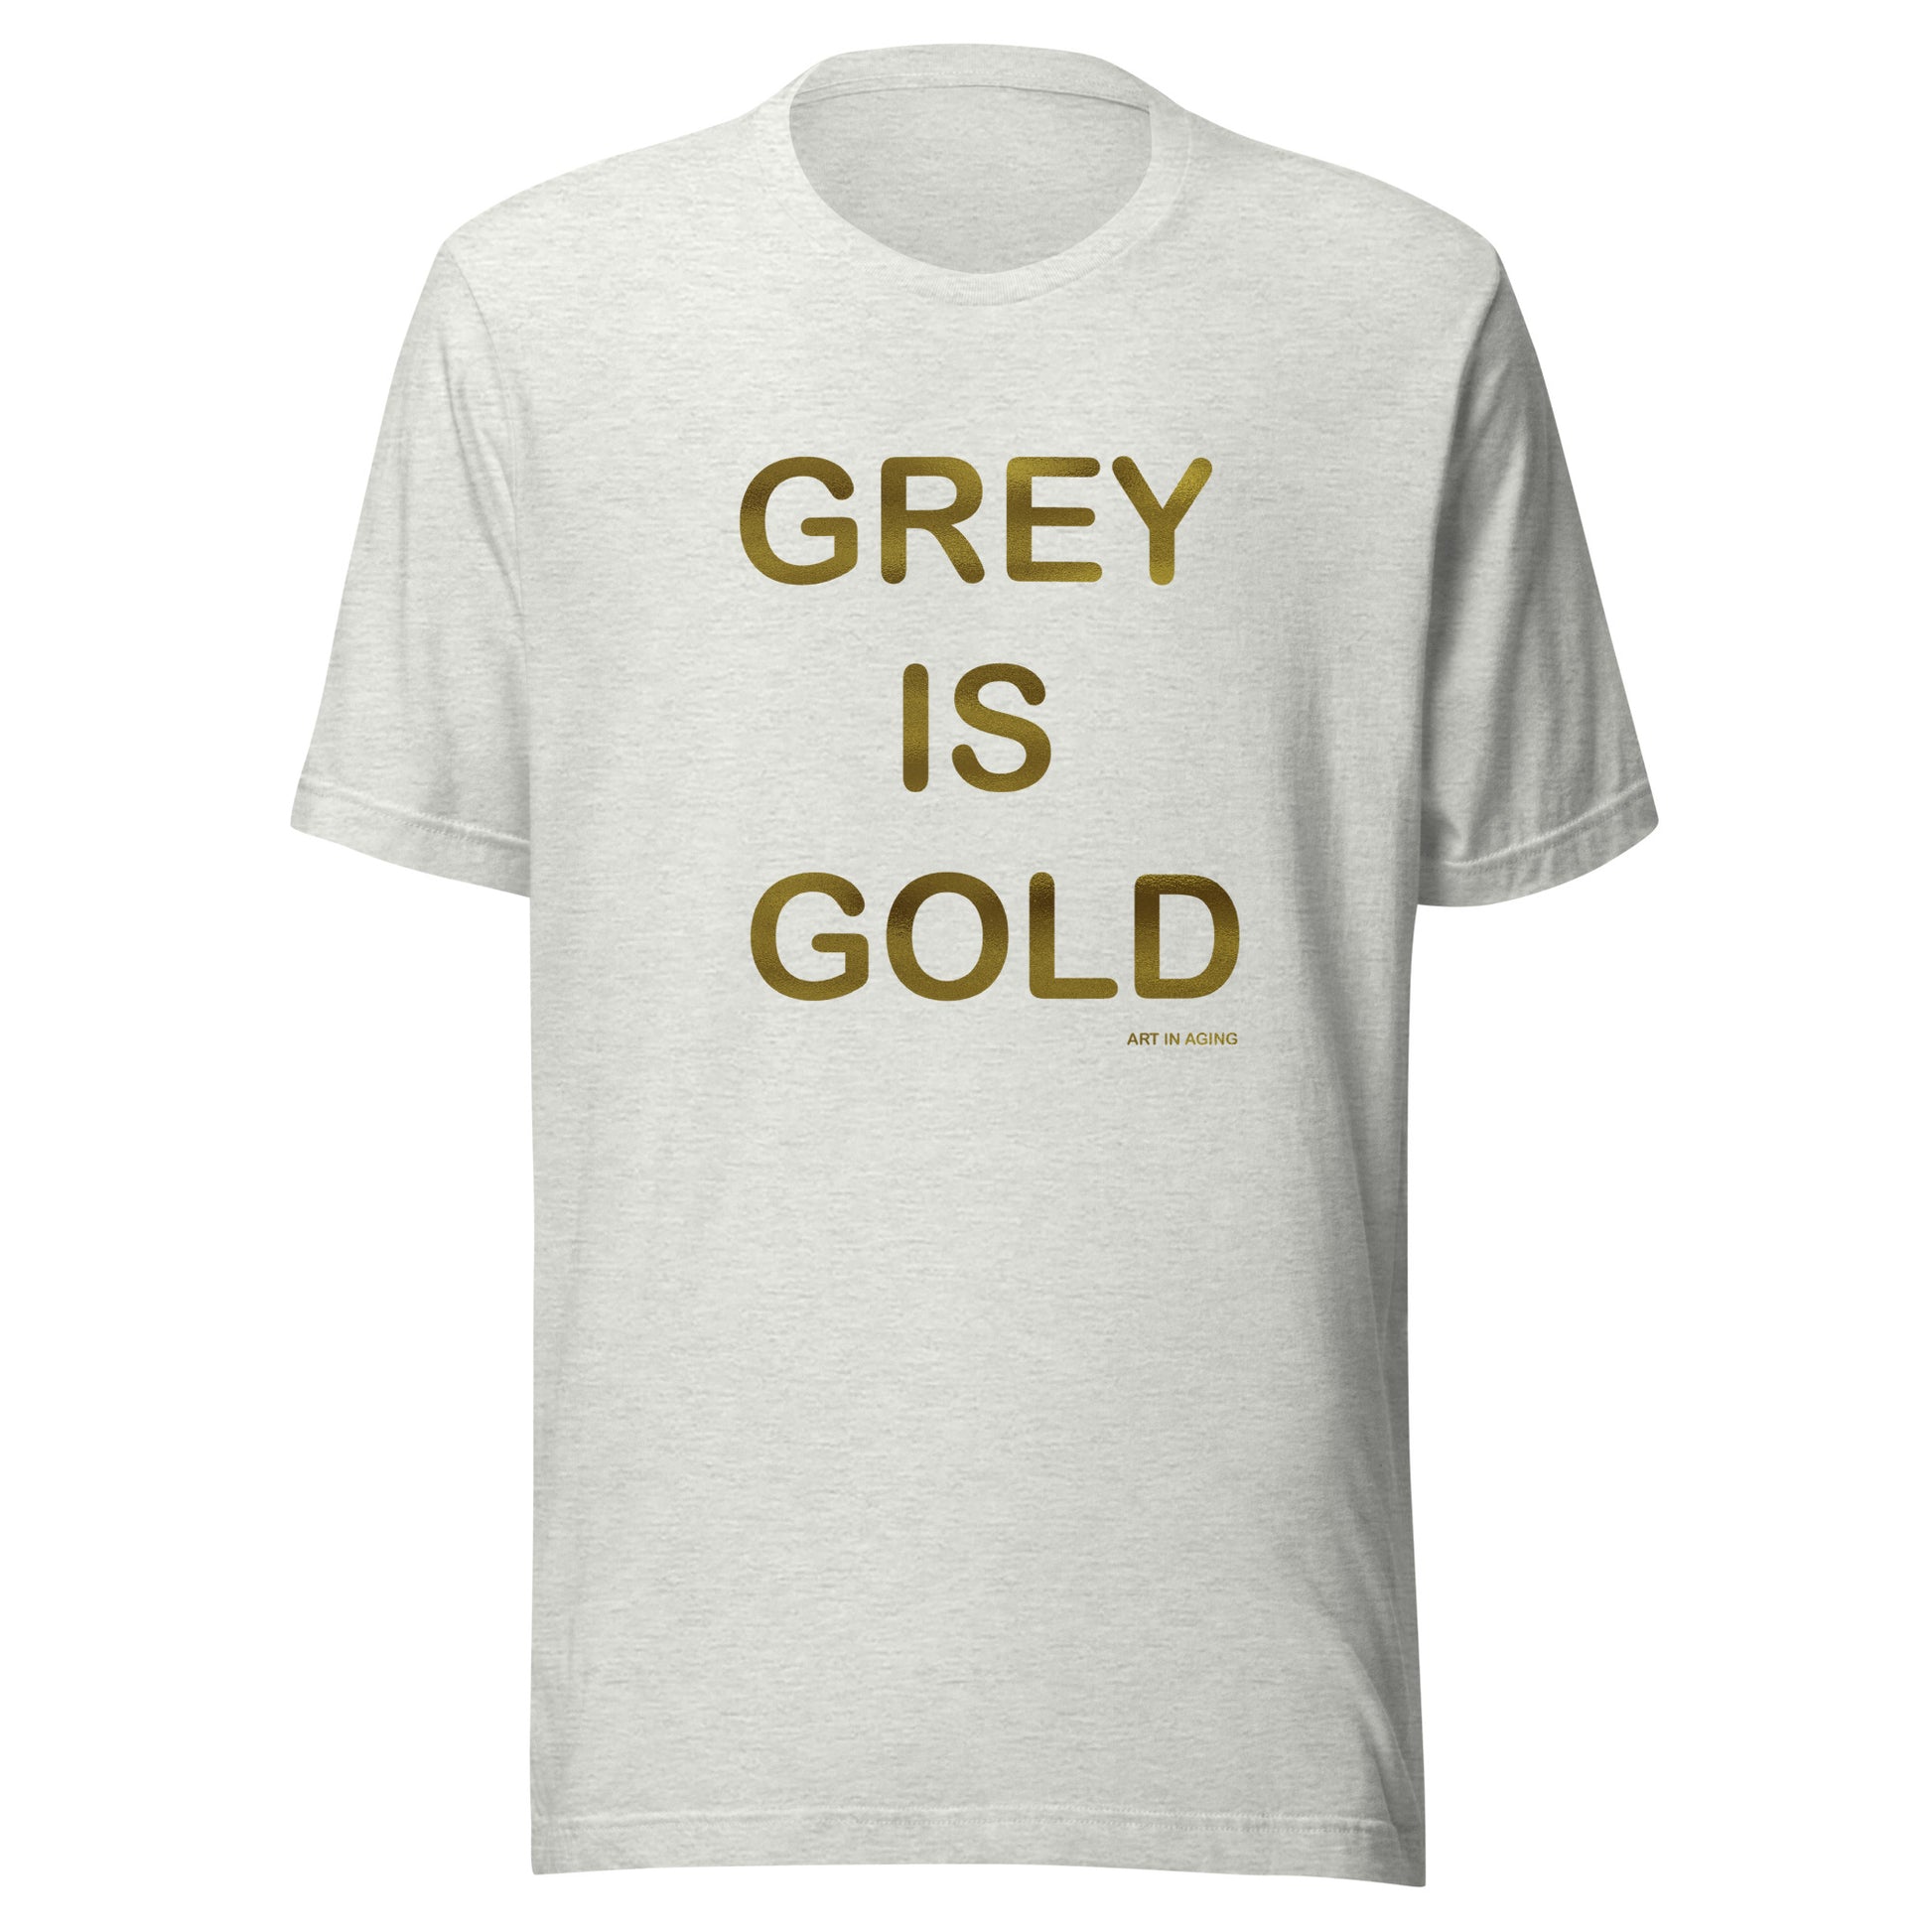 Grey is Gold T-Shirt | Art in Aging